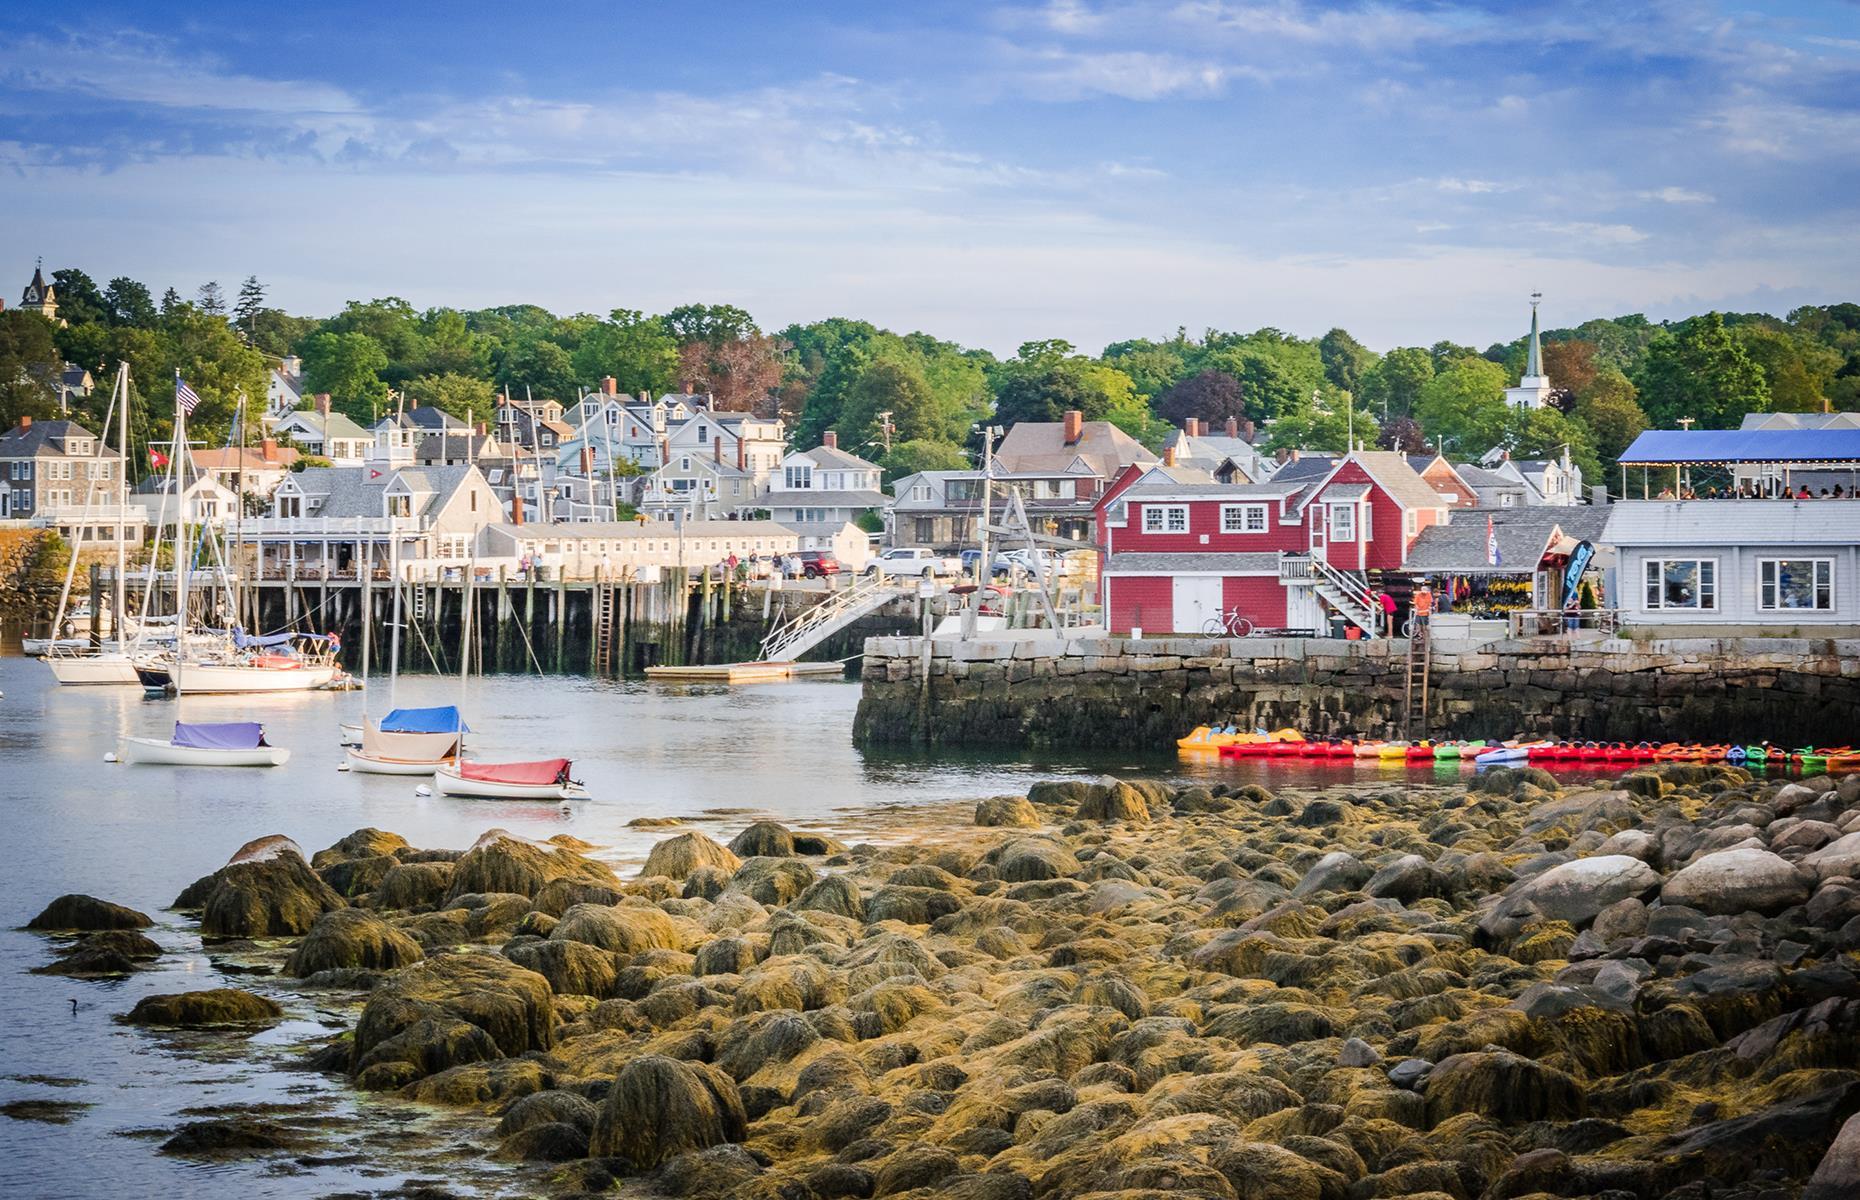 The romantic coastal town of Rockport in Massachusetts, located on Cape Ann, is surrounded by beautiful beaches and is home to Motif Number 1 – a red fishing shack often cited as the most-painted building in America. Head to the town’s Main Street to discover quirky art galleries, a pottery studio, gift stores and Tuck’s Candies with its delicious saltwater toffee.